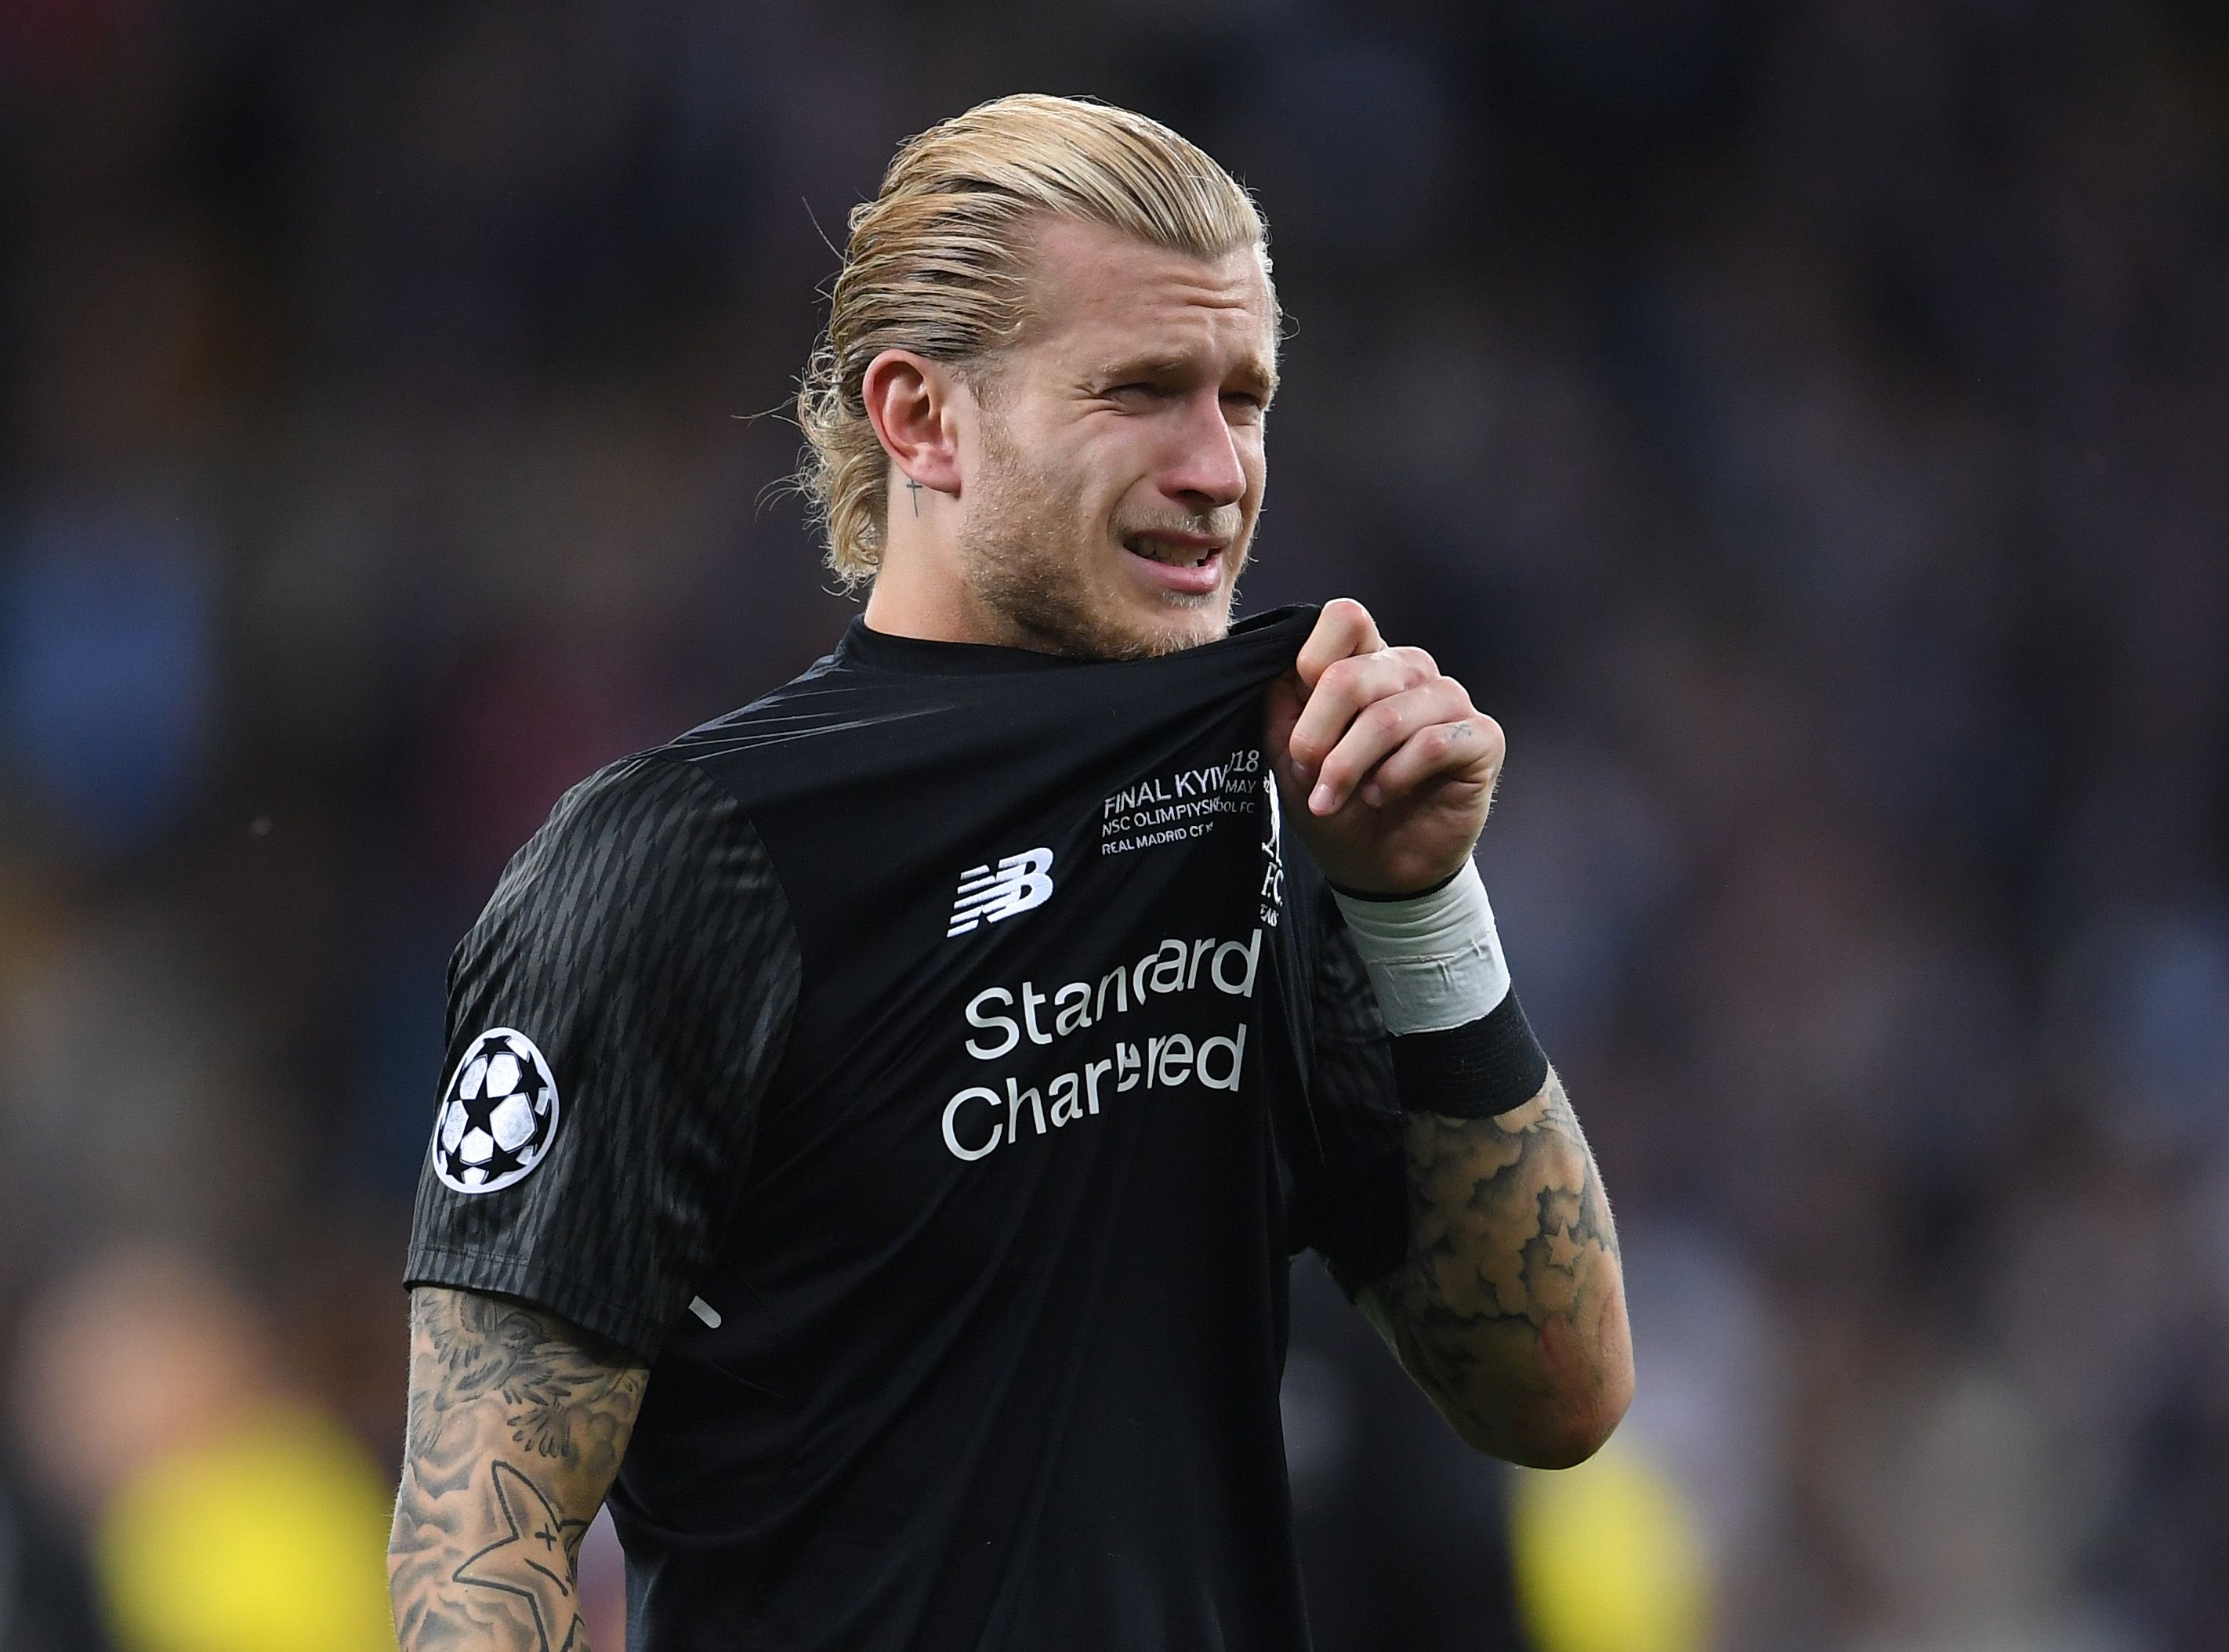 The moment Liverpool players gave up on Loris Karius has been revealed